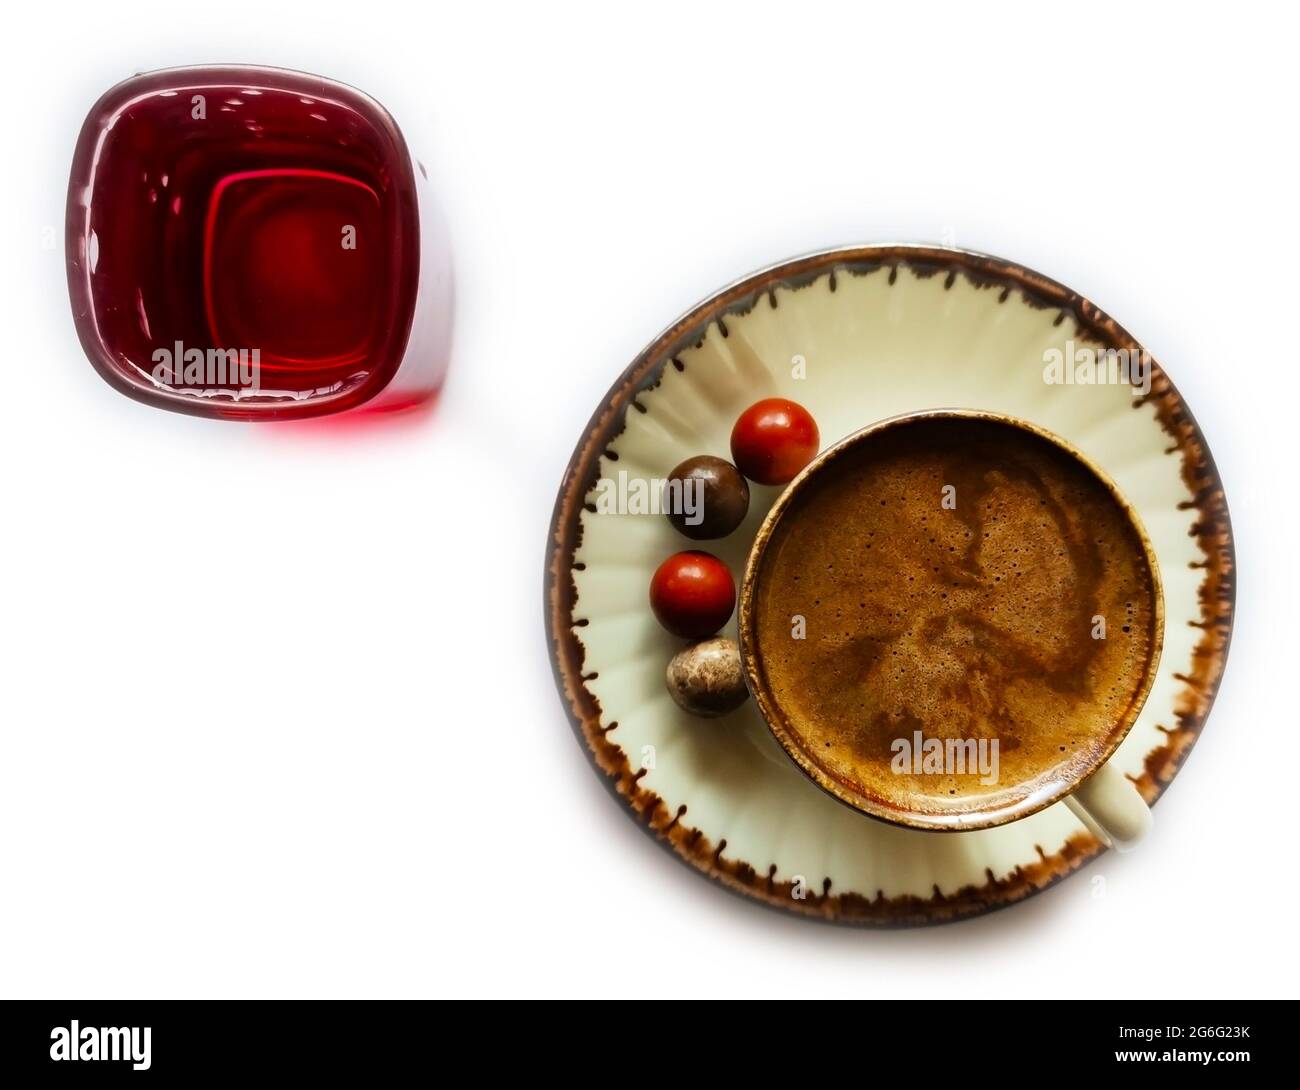 Turkish coffee on white background and front. Colored chocolate next to the coffee and water in a red glass. Stock Photo